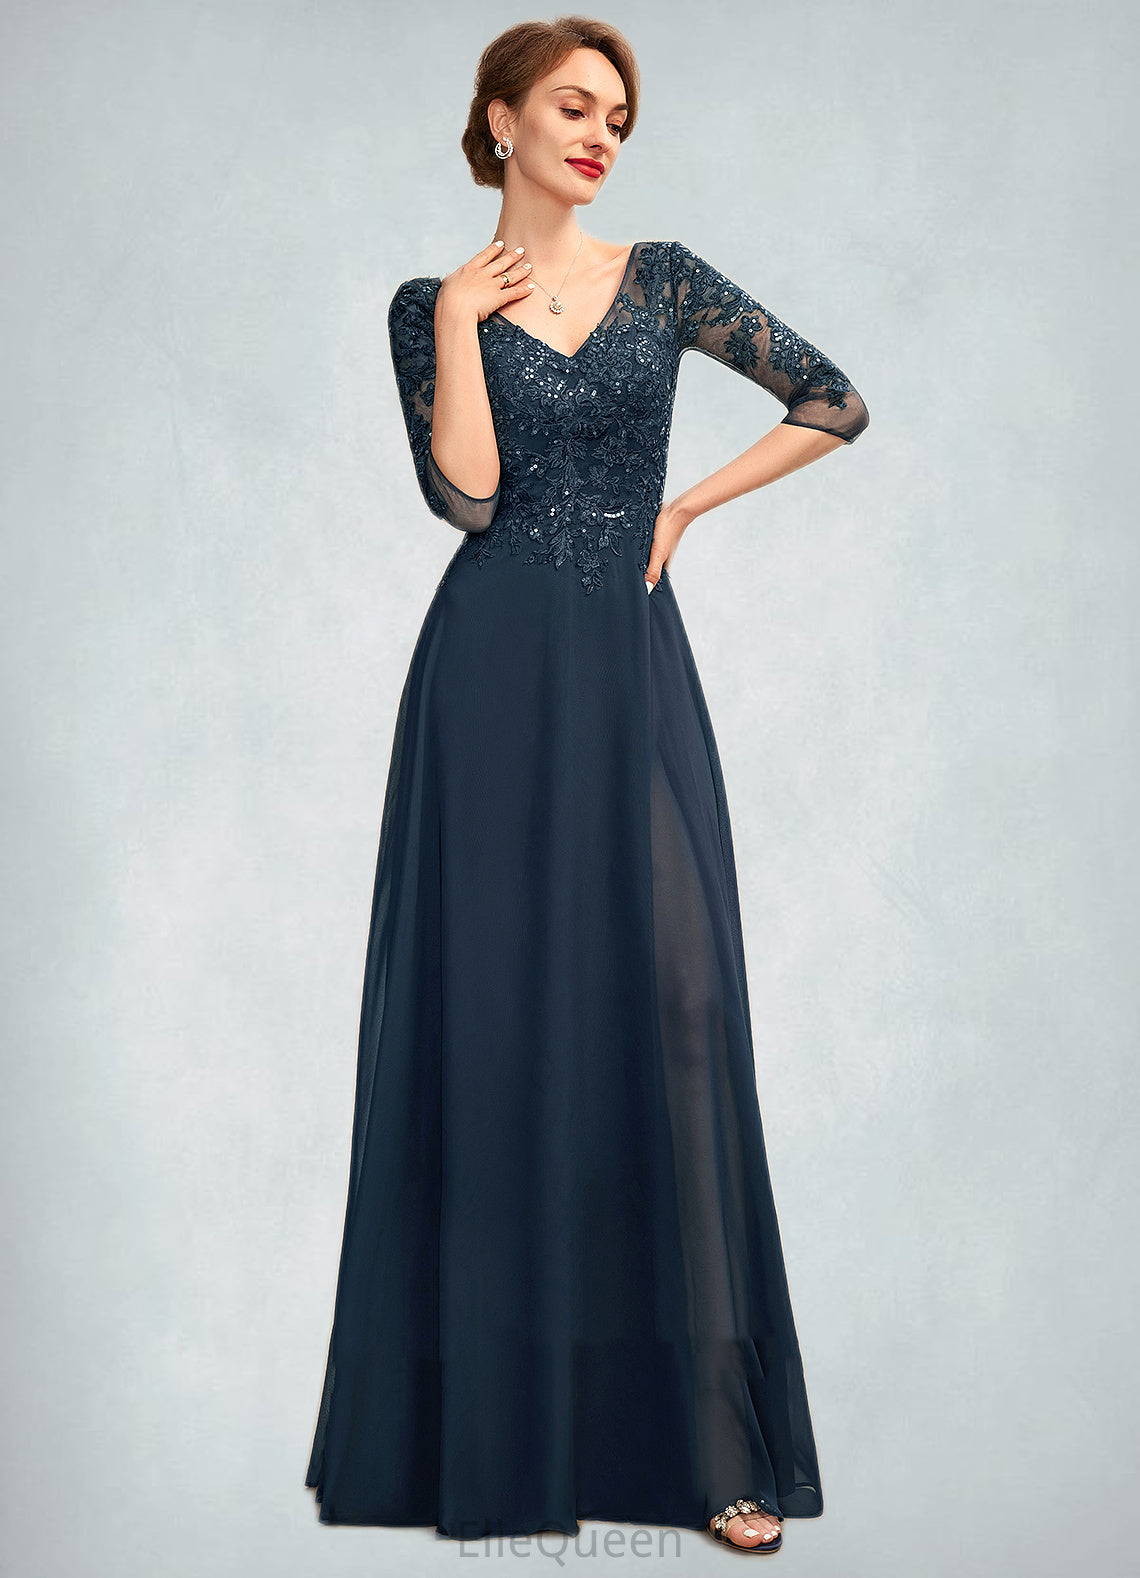 Tiana A-Line V-neck Floor-Length Chiffon Lace Mother of the Bride Dress With Sequins Split Front DG126P0015014